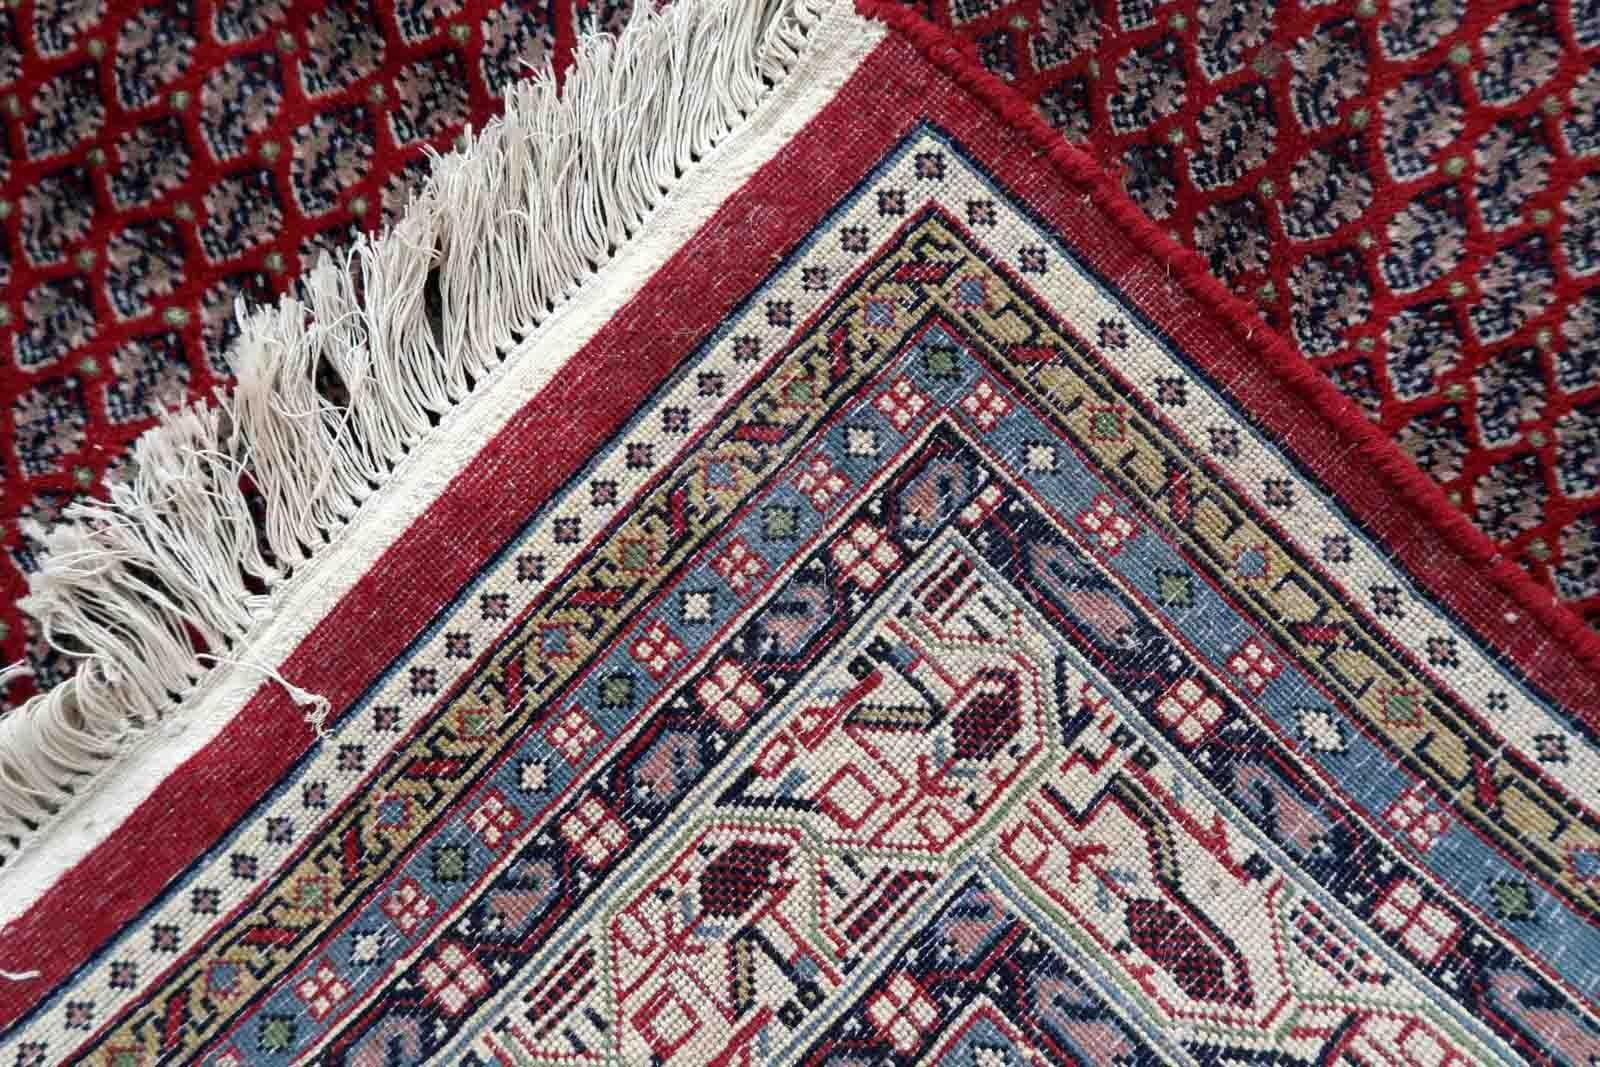 Handmade vintage Indian Seraband rug in repeating pattern and red shade. The rug is from the end of 20th century in original good condition.

-condition: original good,

-circa: 1970s,

-size: 6.6' x 8.2' (204cm x 252cm),

-material: